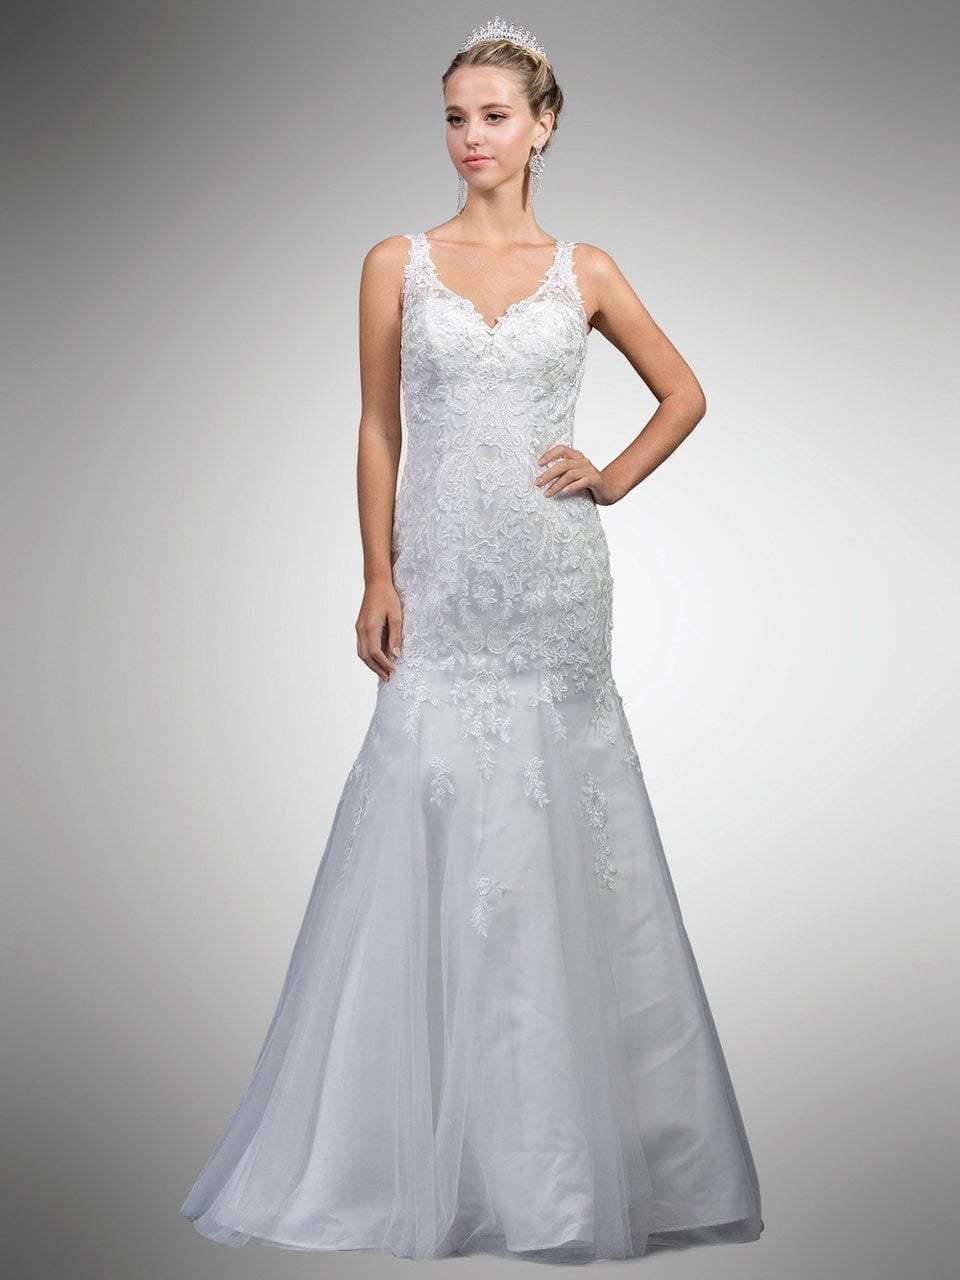 Dancing Queen Bridal - A7001 Sleeveless Beaded Lace Trumpet Gown
